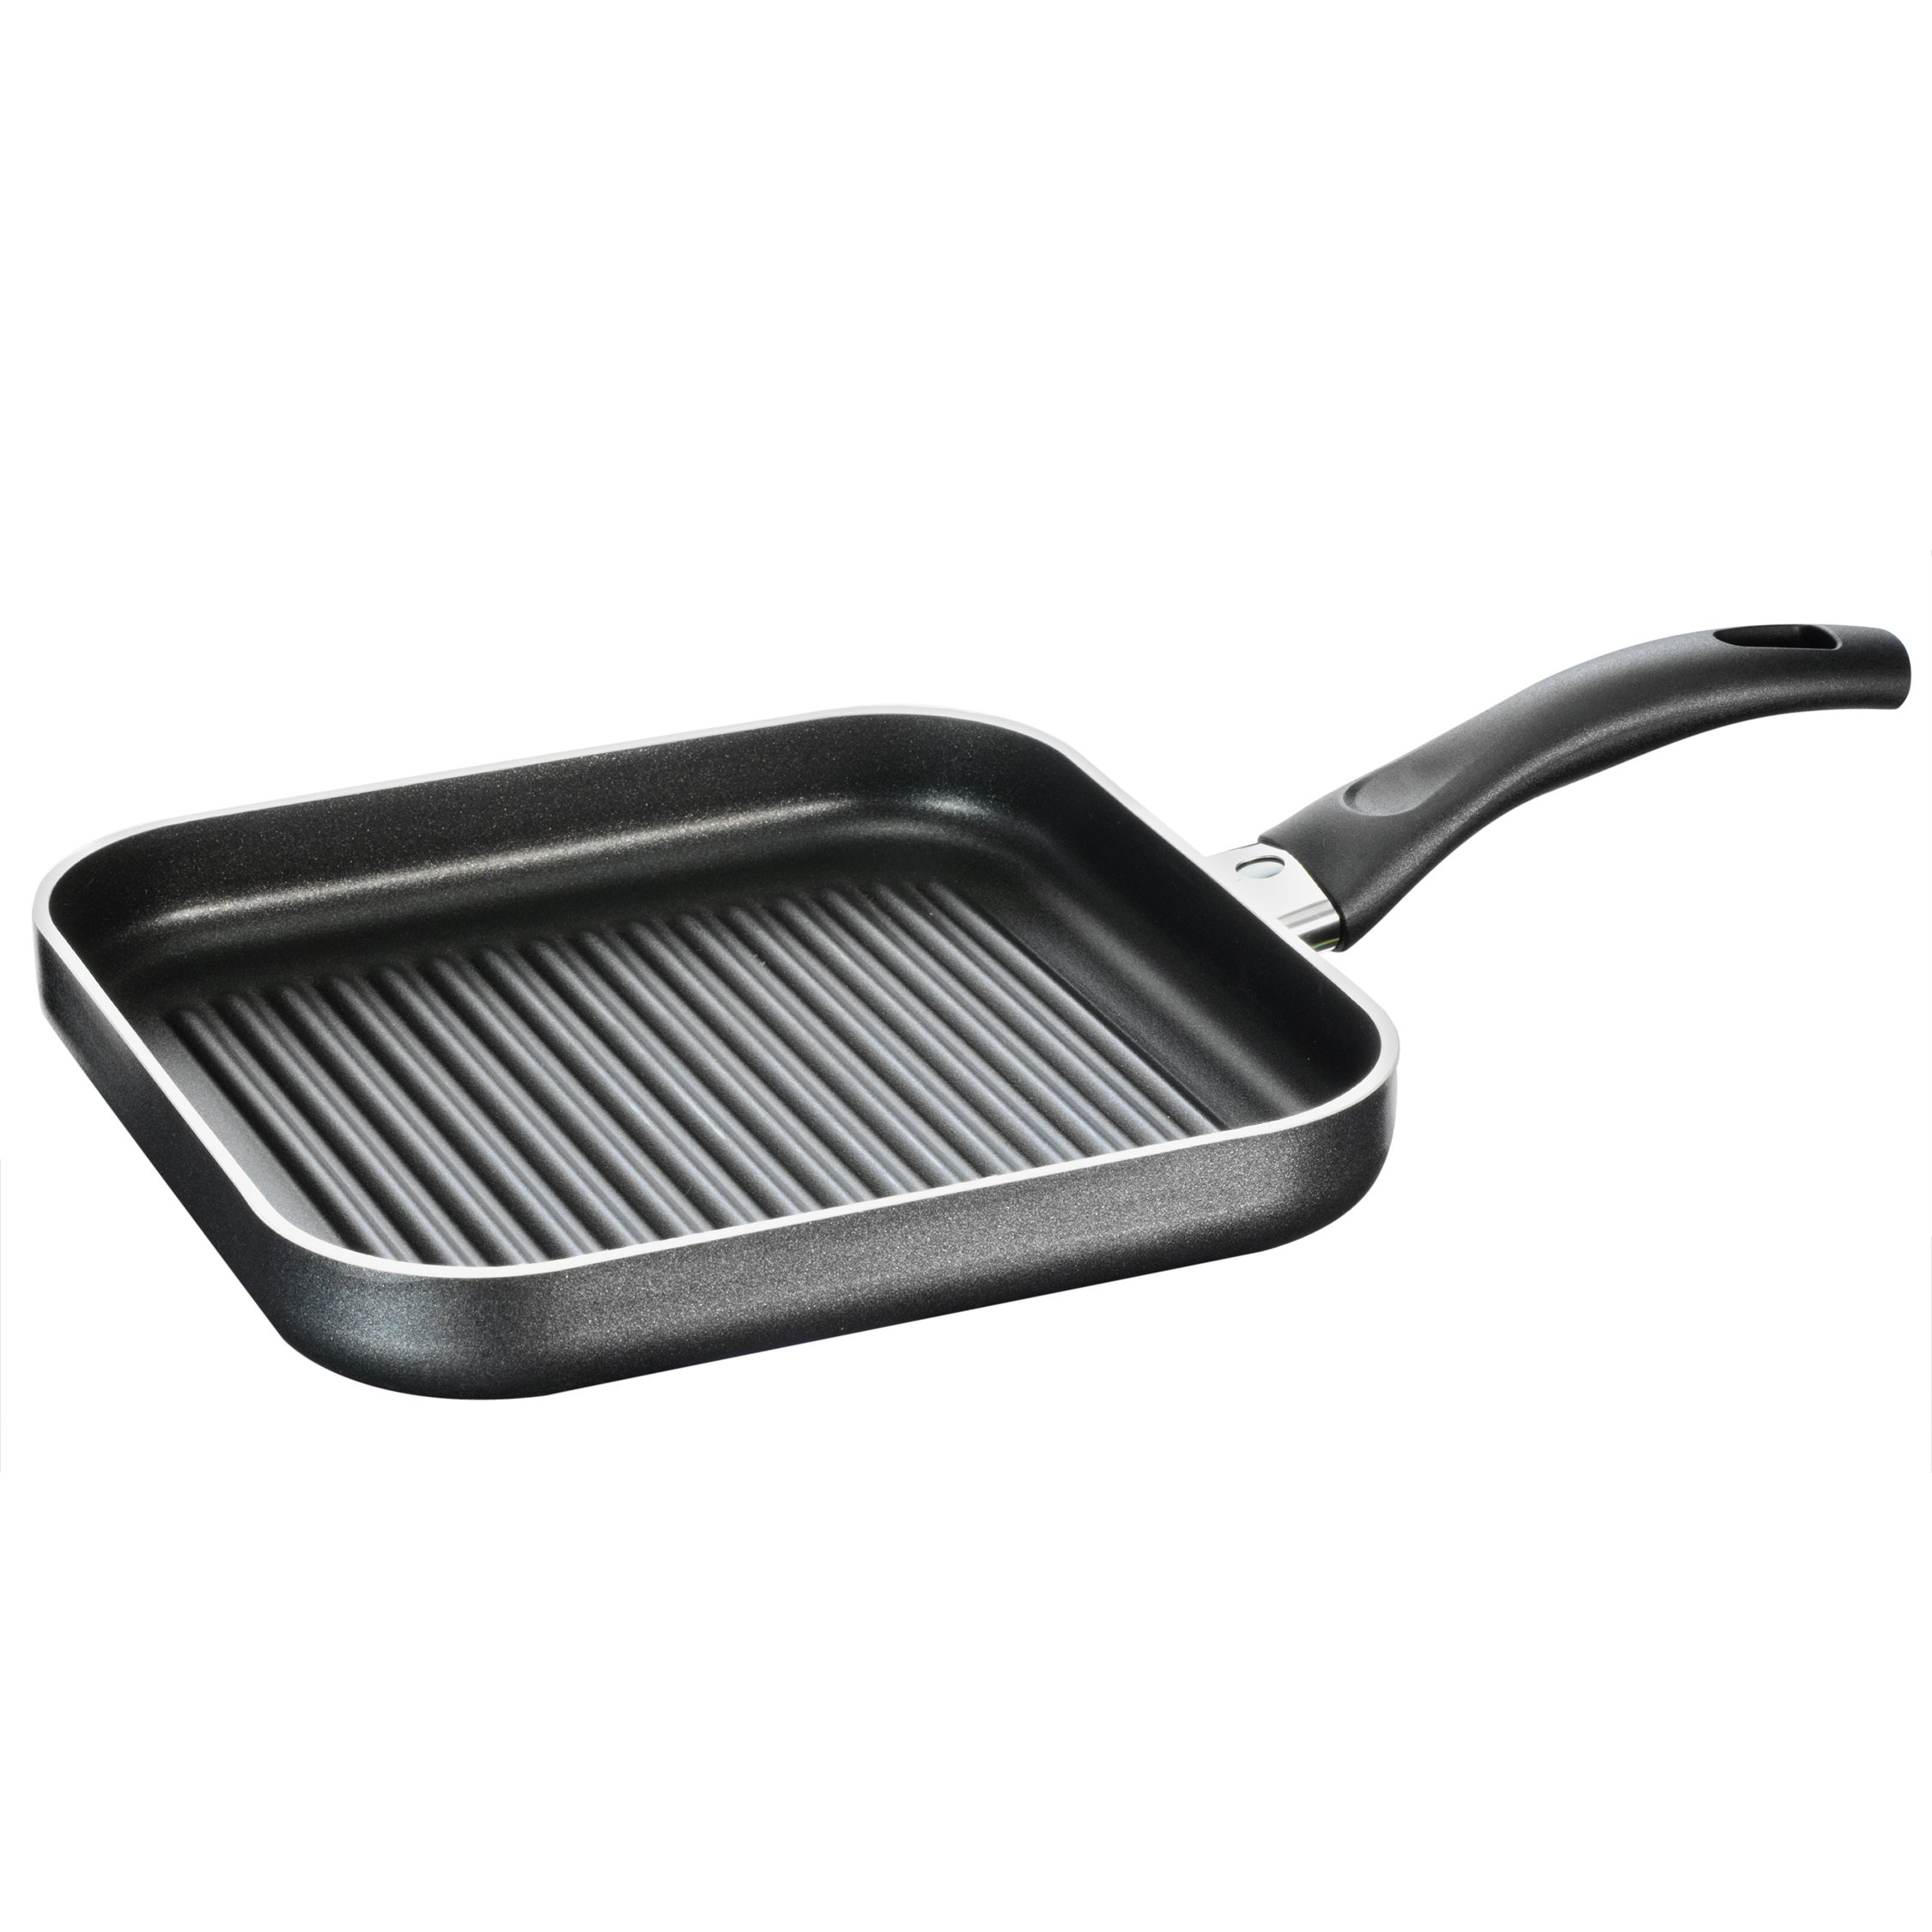 Thermopoint Grill Pan, 27cm